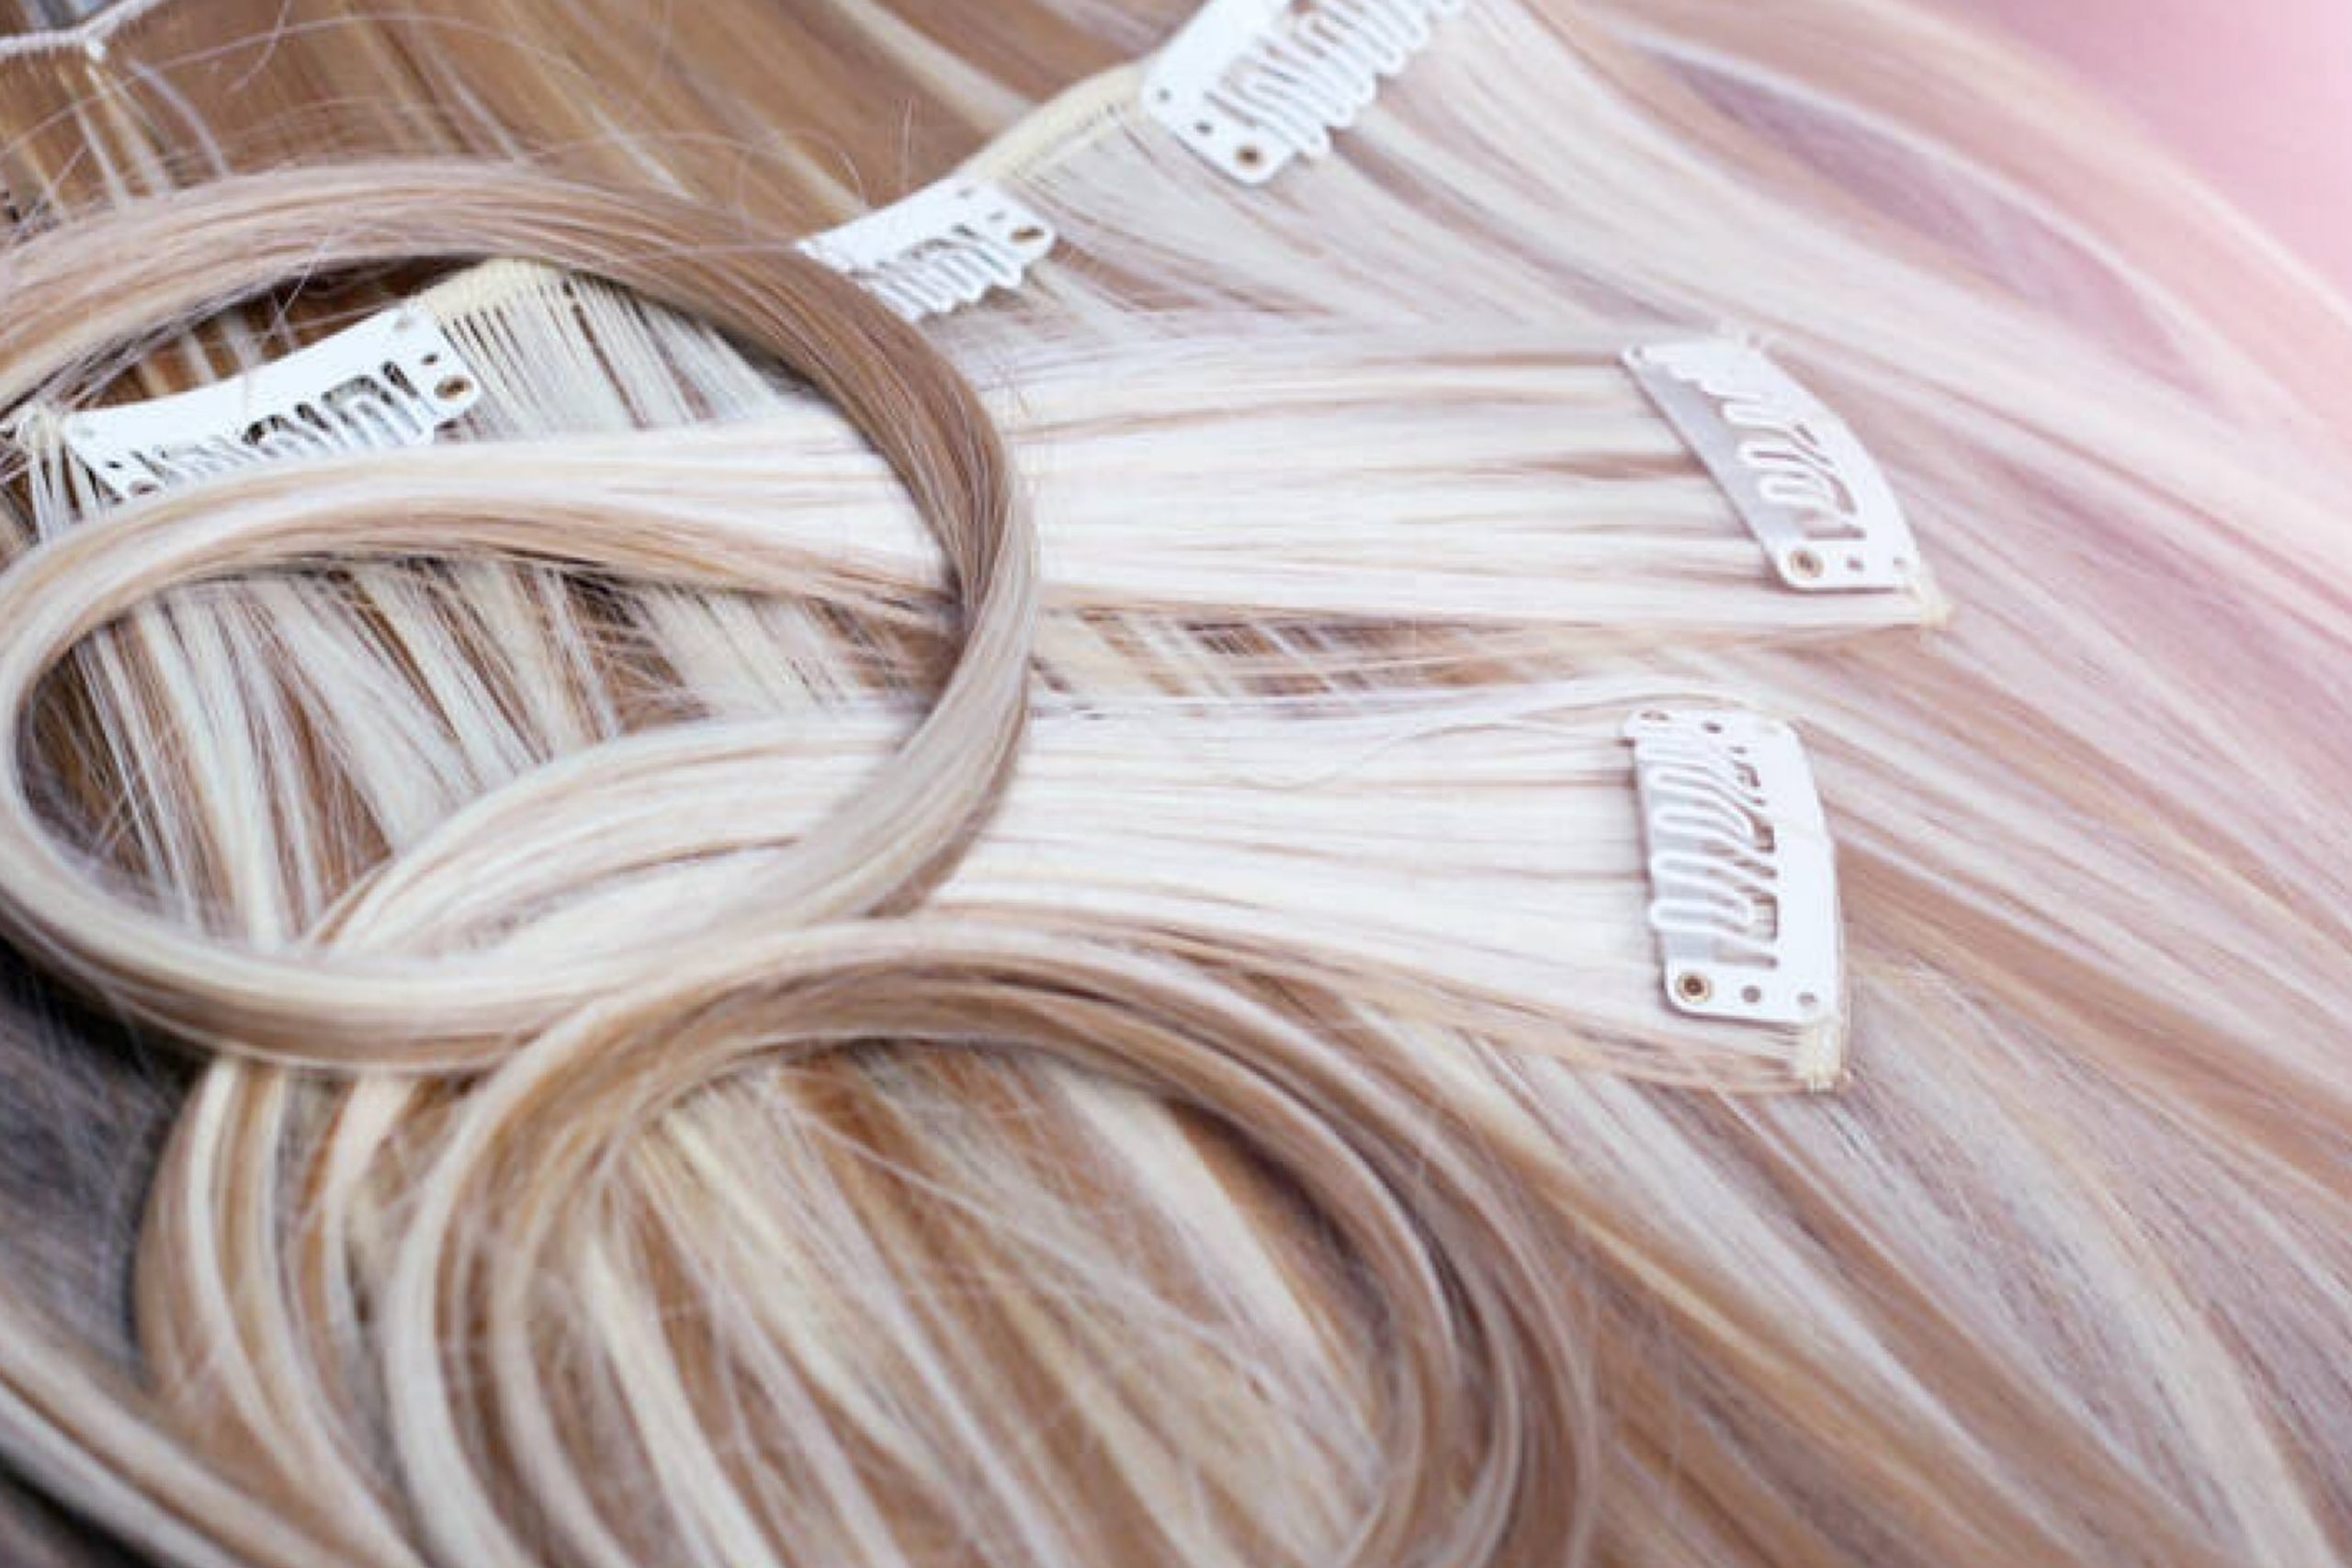 Real Hair Extensions